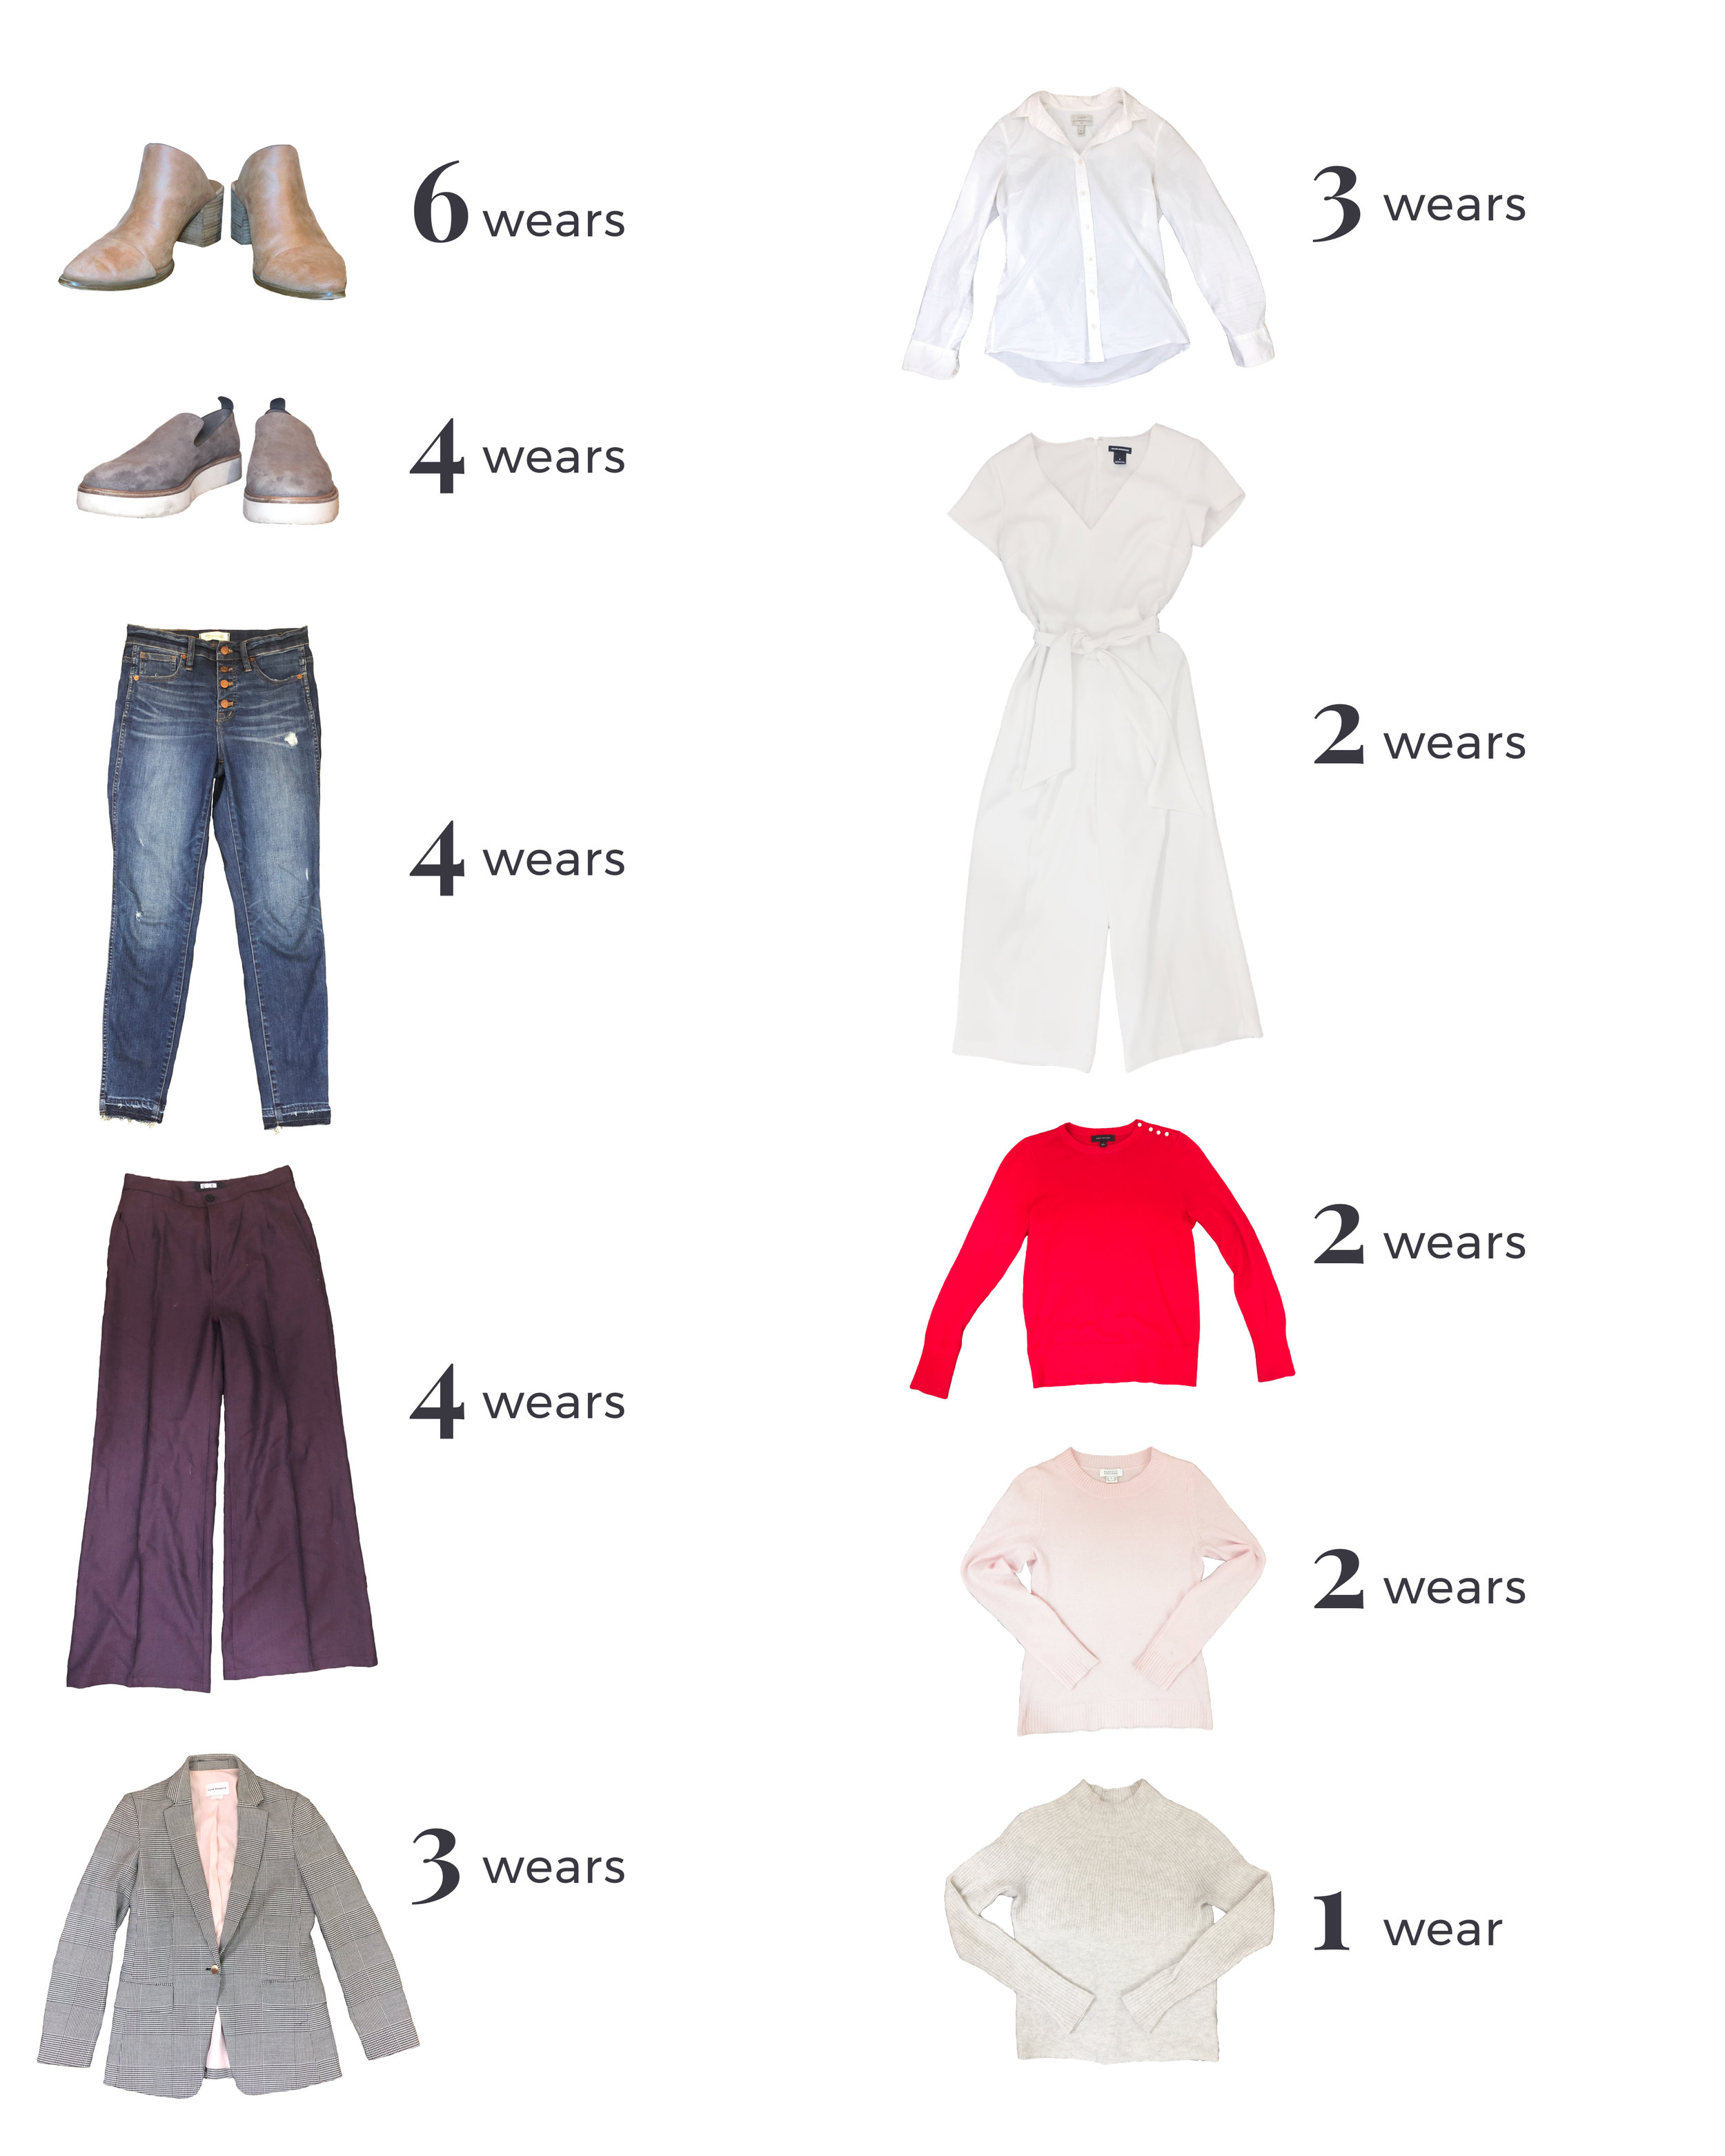 2021 Wrapped - Top 10 Style Favourites - whatveewore